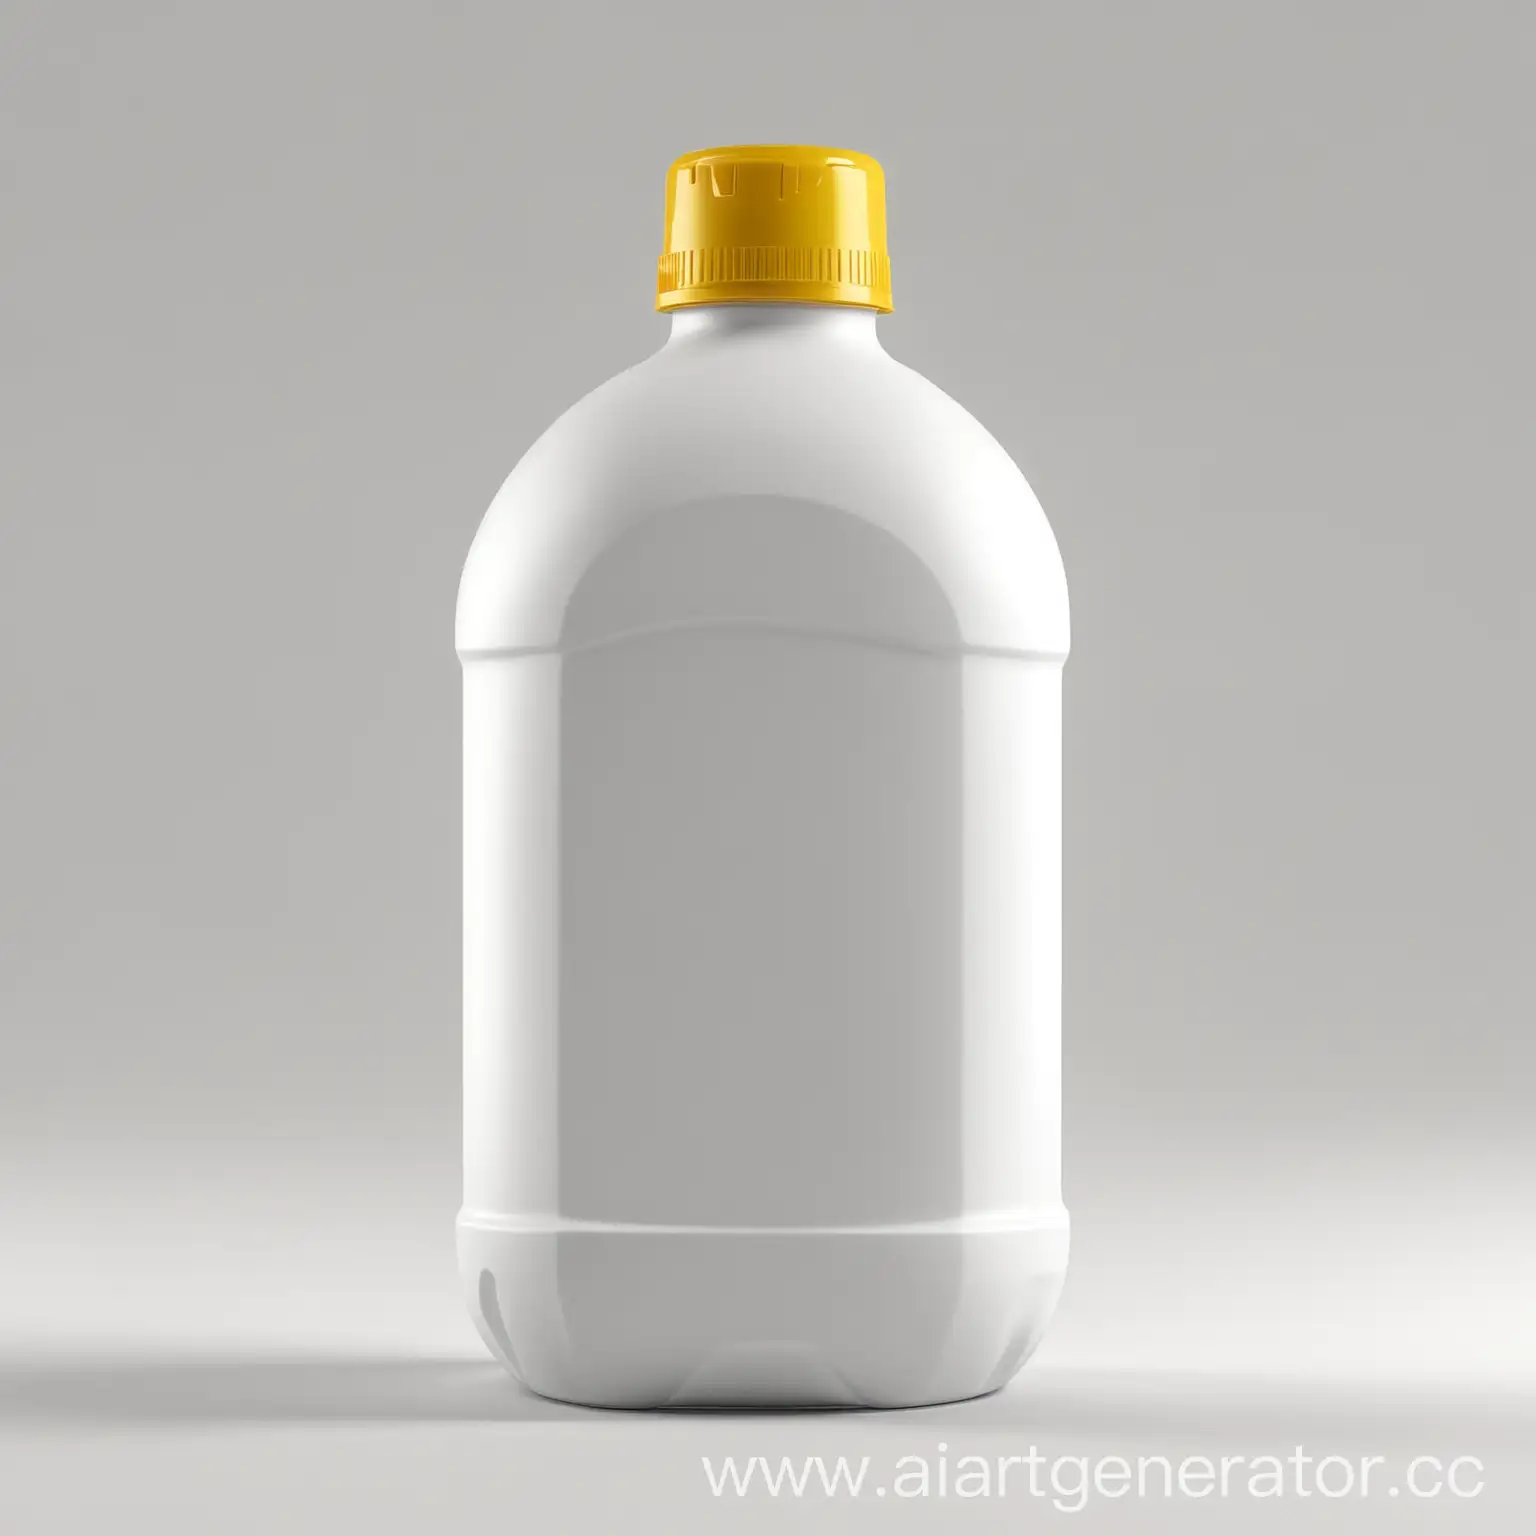 Realistic-3D-Render-of-Round-White-Plastic-Bottle-with-Yellow-Cap-on-White-Background